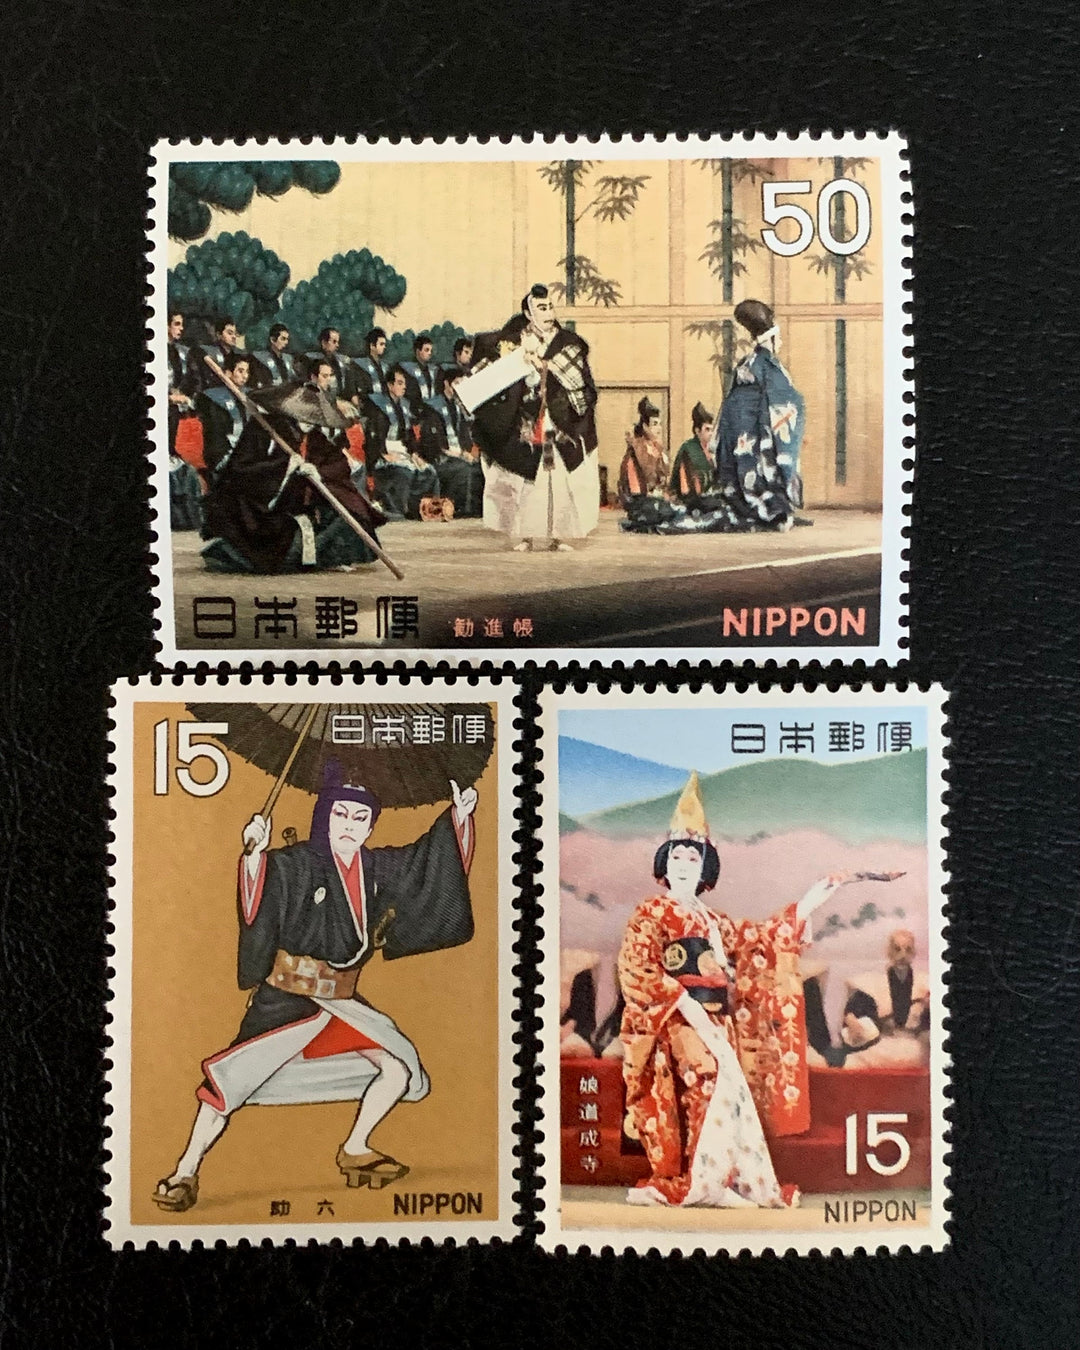 Japan- Original Vintage Postage Stamps- 1970 Theatre- for the collector, artist or crafter - scrapbooks, decoupage, paper crafts